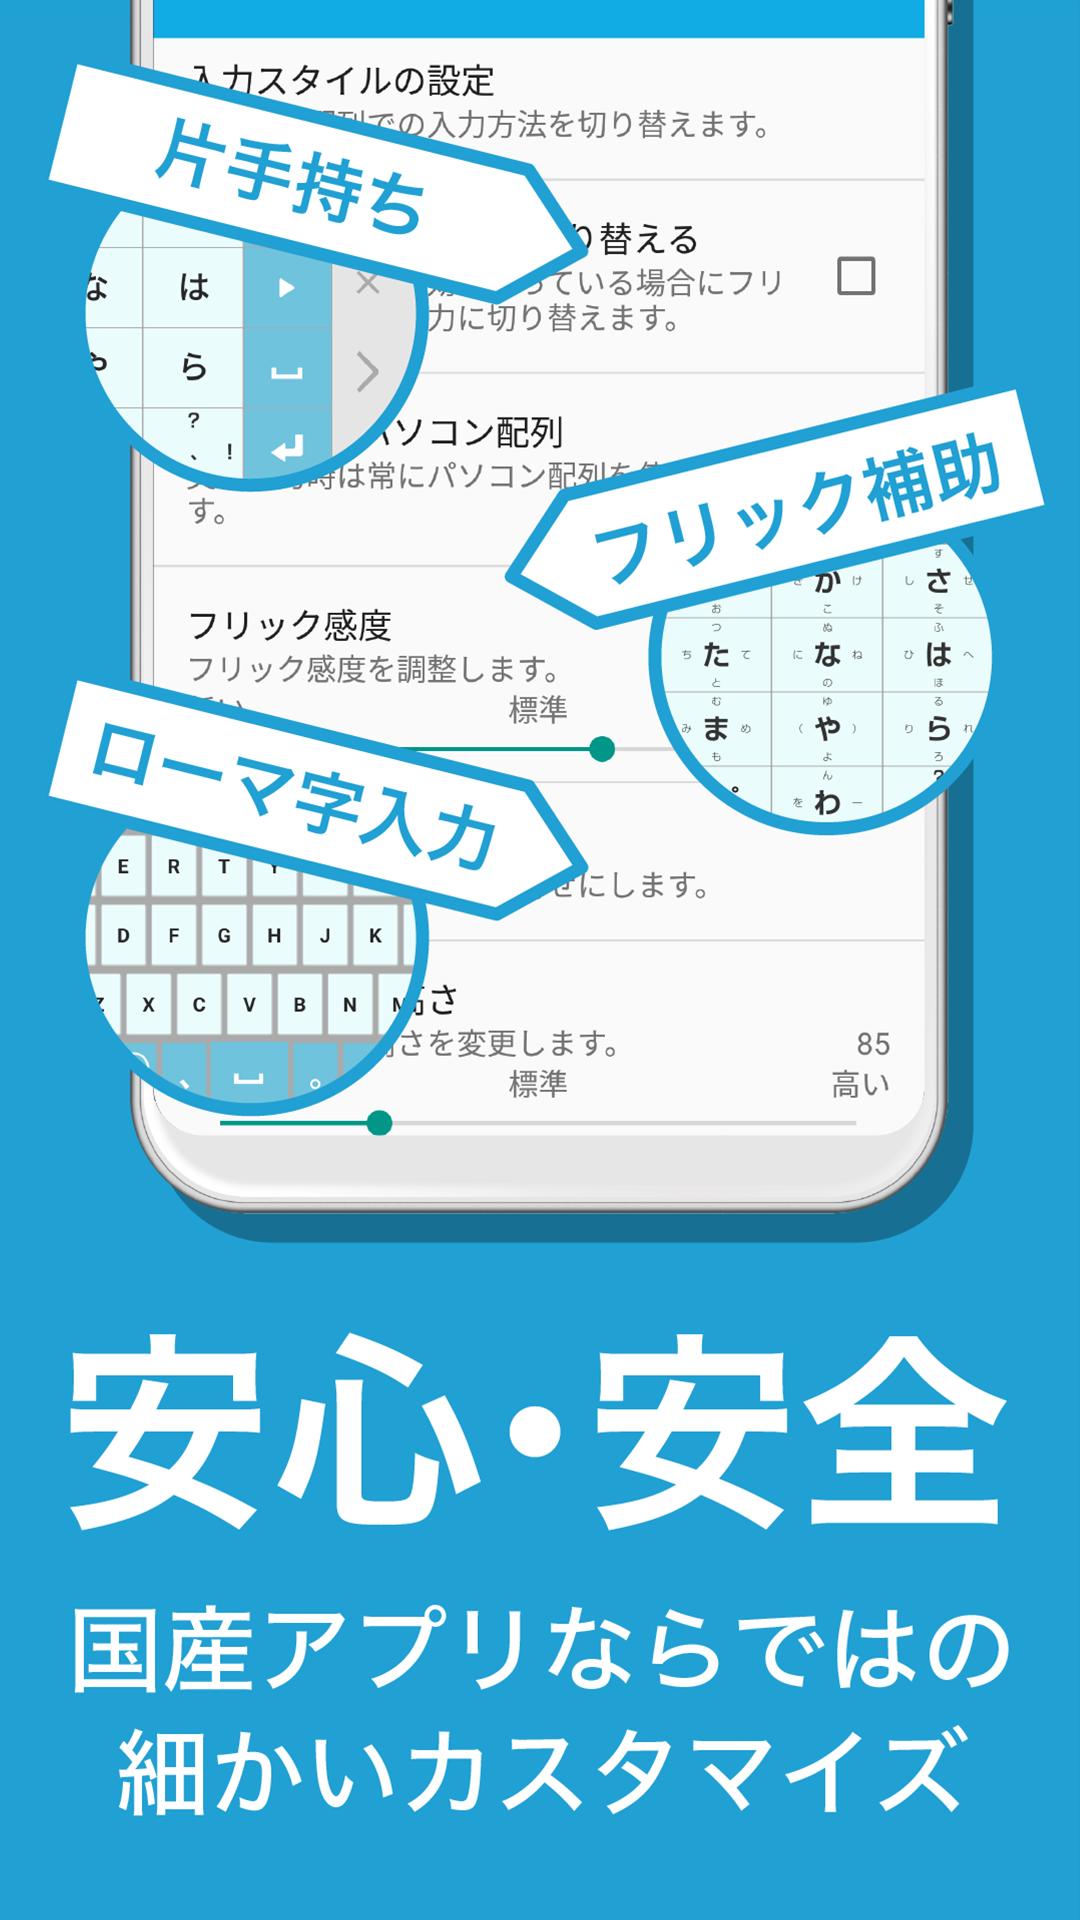 Flick フリック 旧 みんなの顔文字キーボード For Android Apk Download